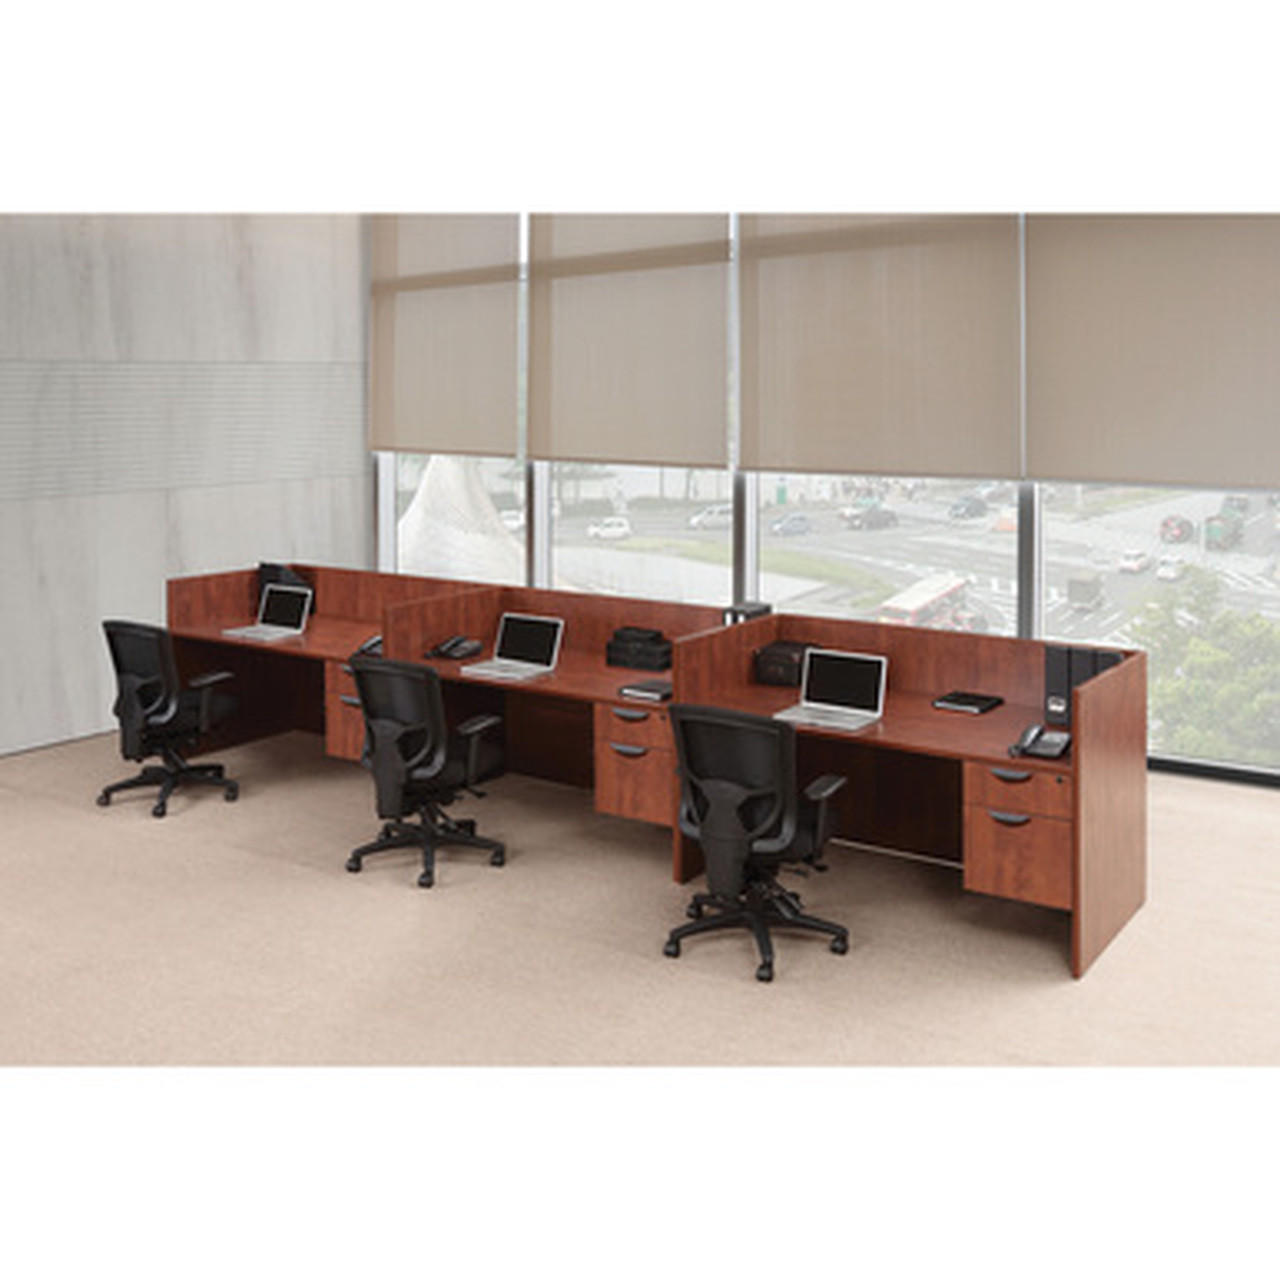  Office Source OS Laminate Multi-User Workstation OS200 